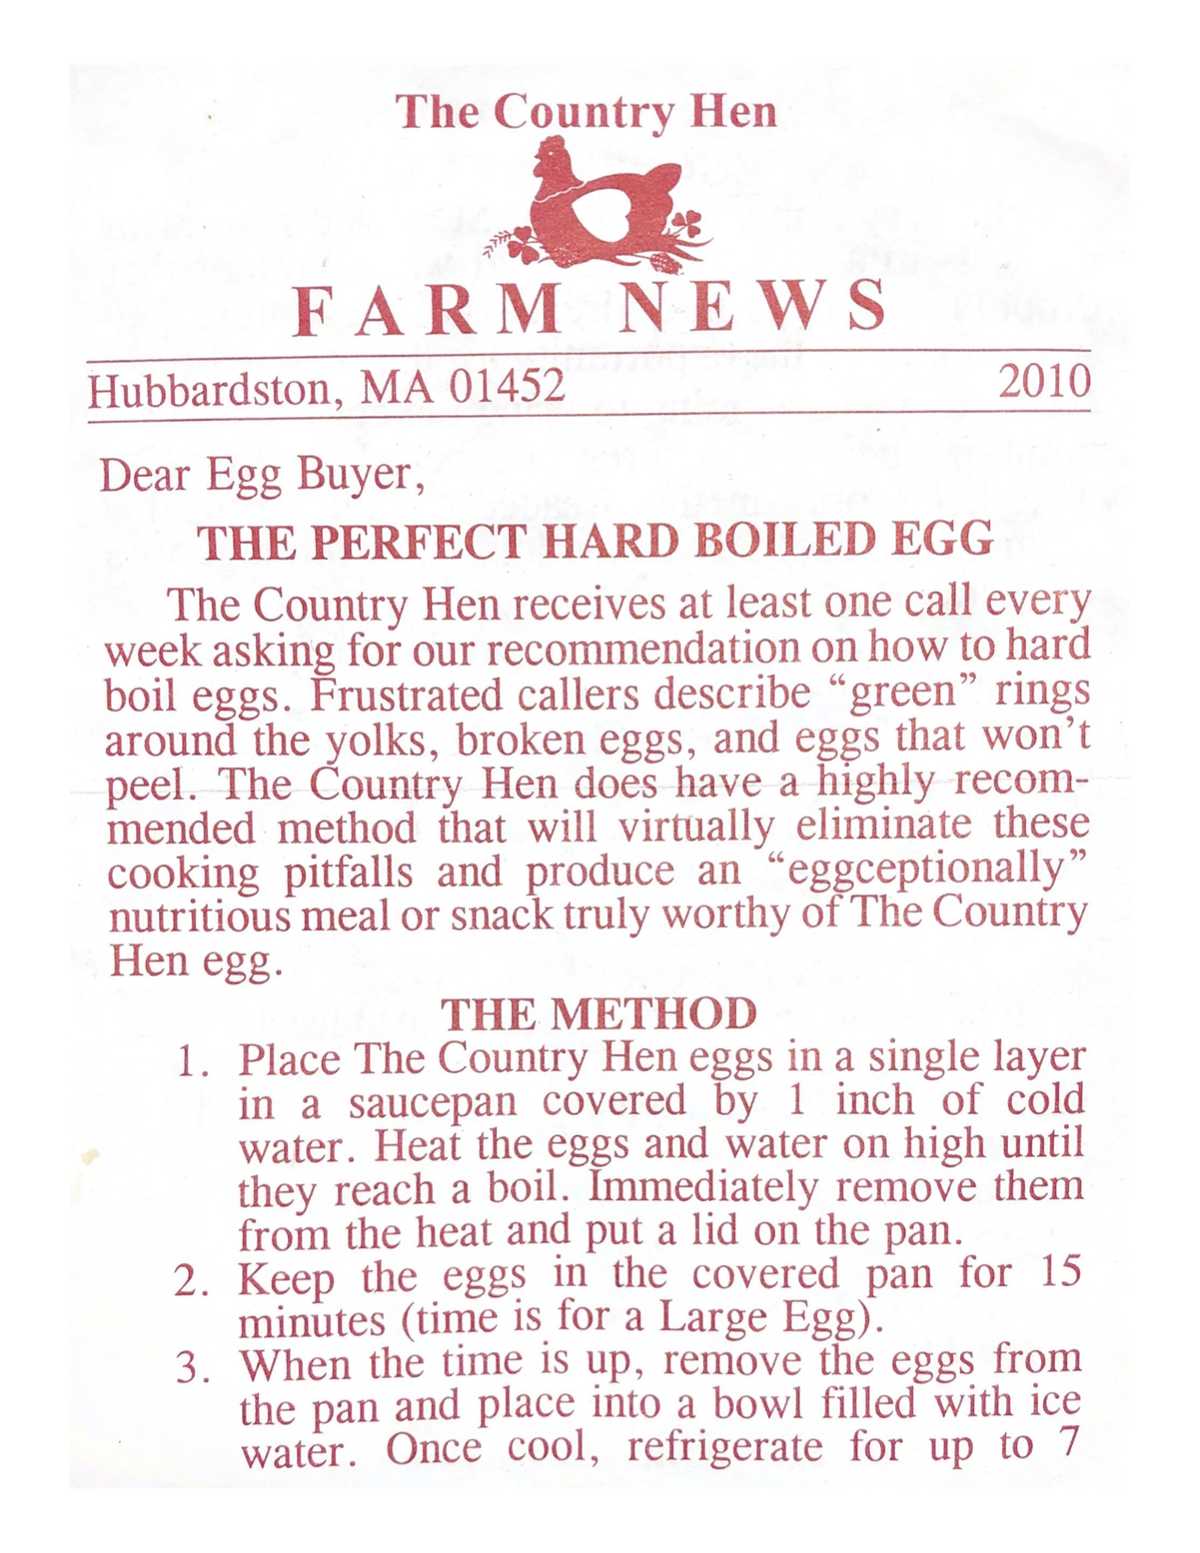 The Country Hen’s hard-boiled egg instructions, front